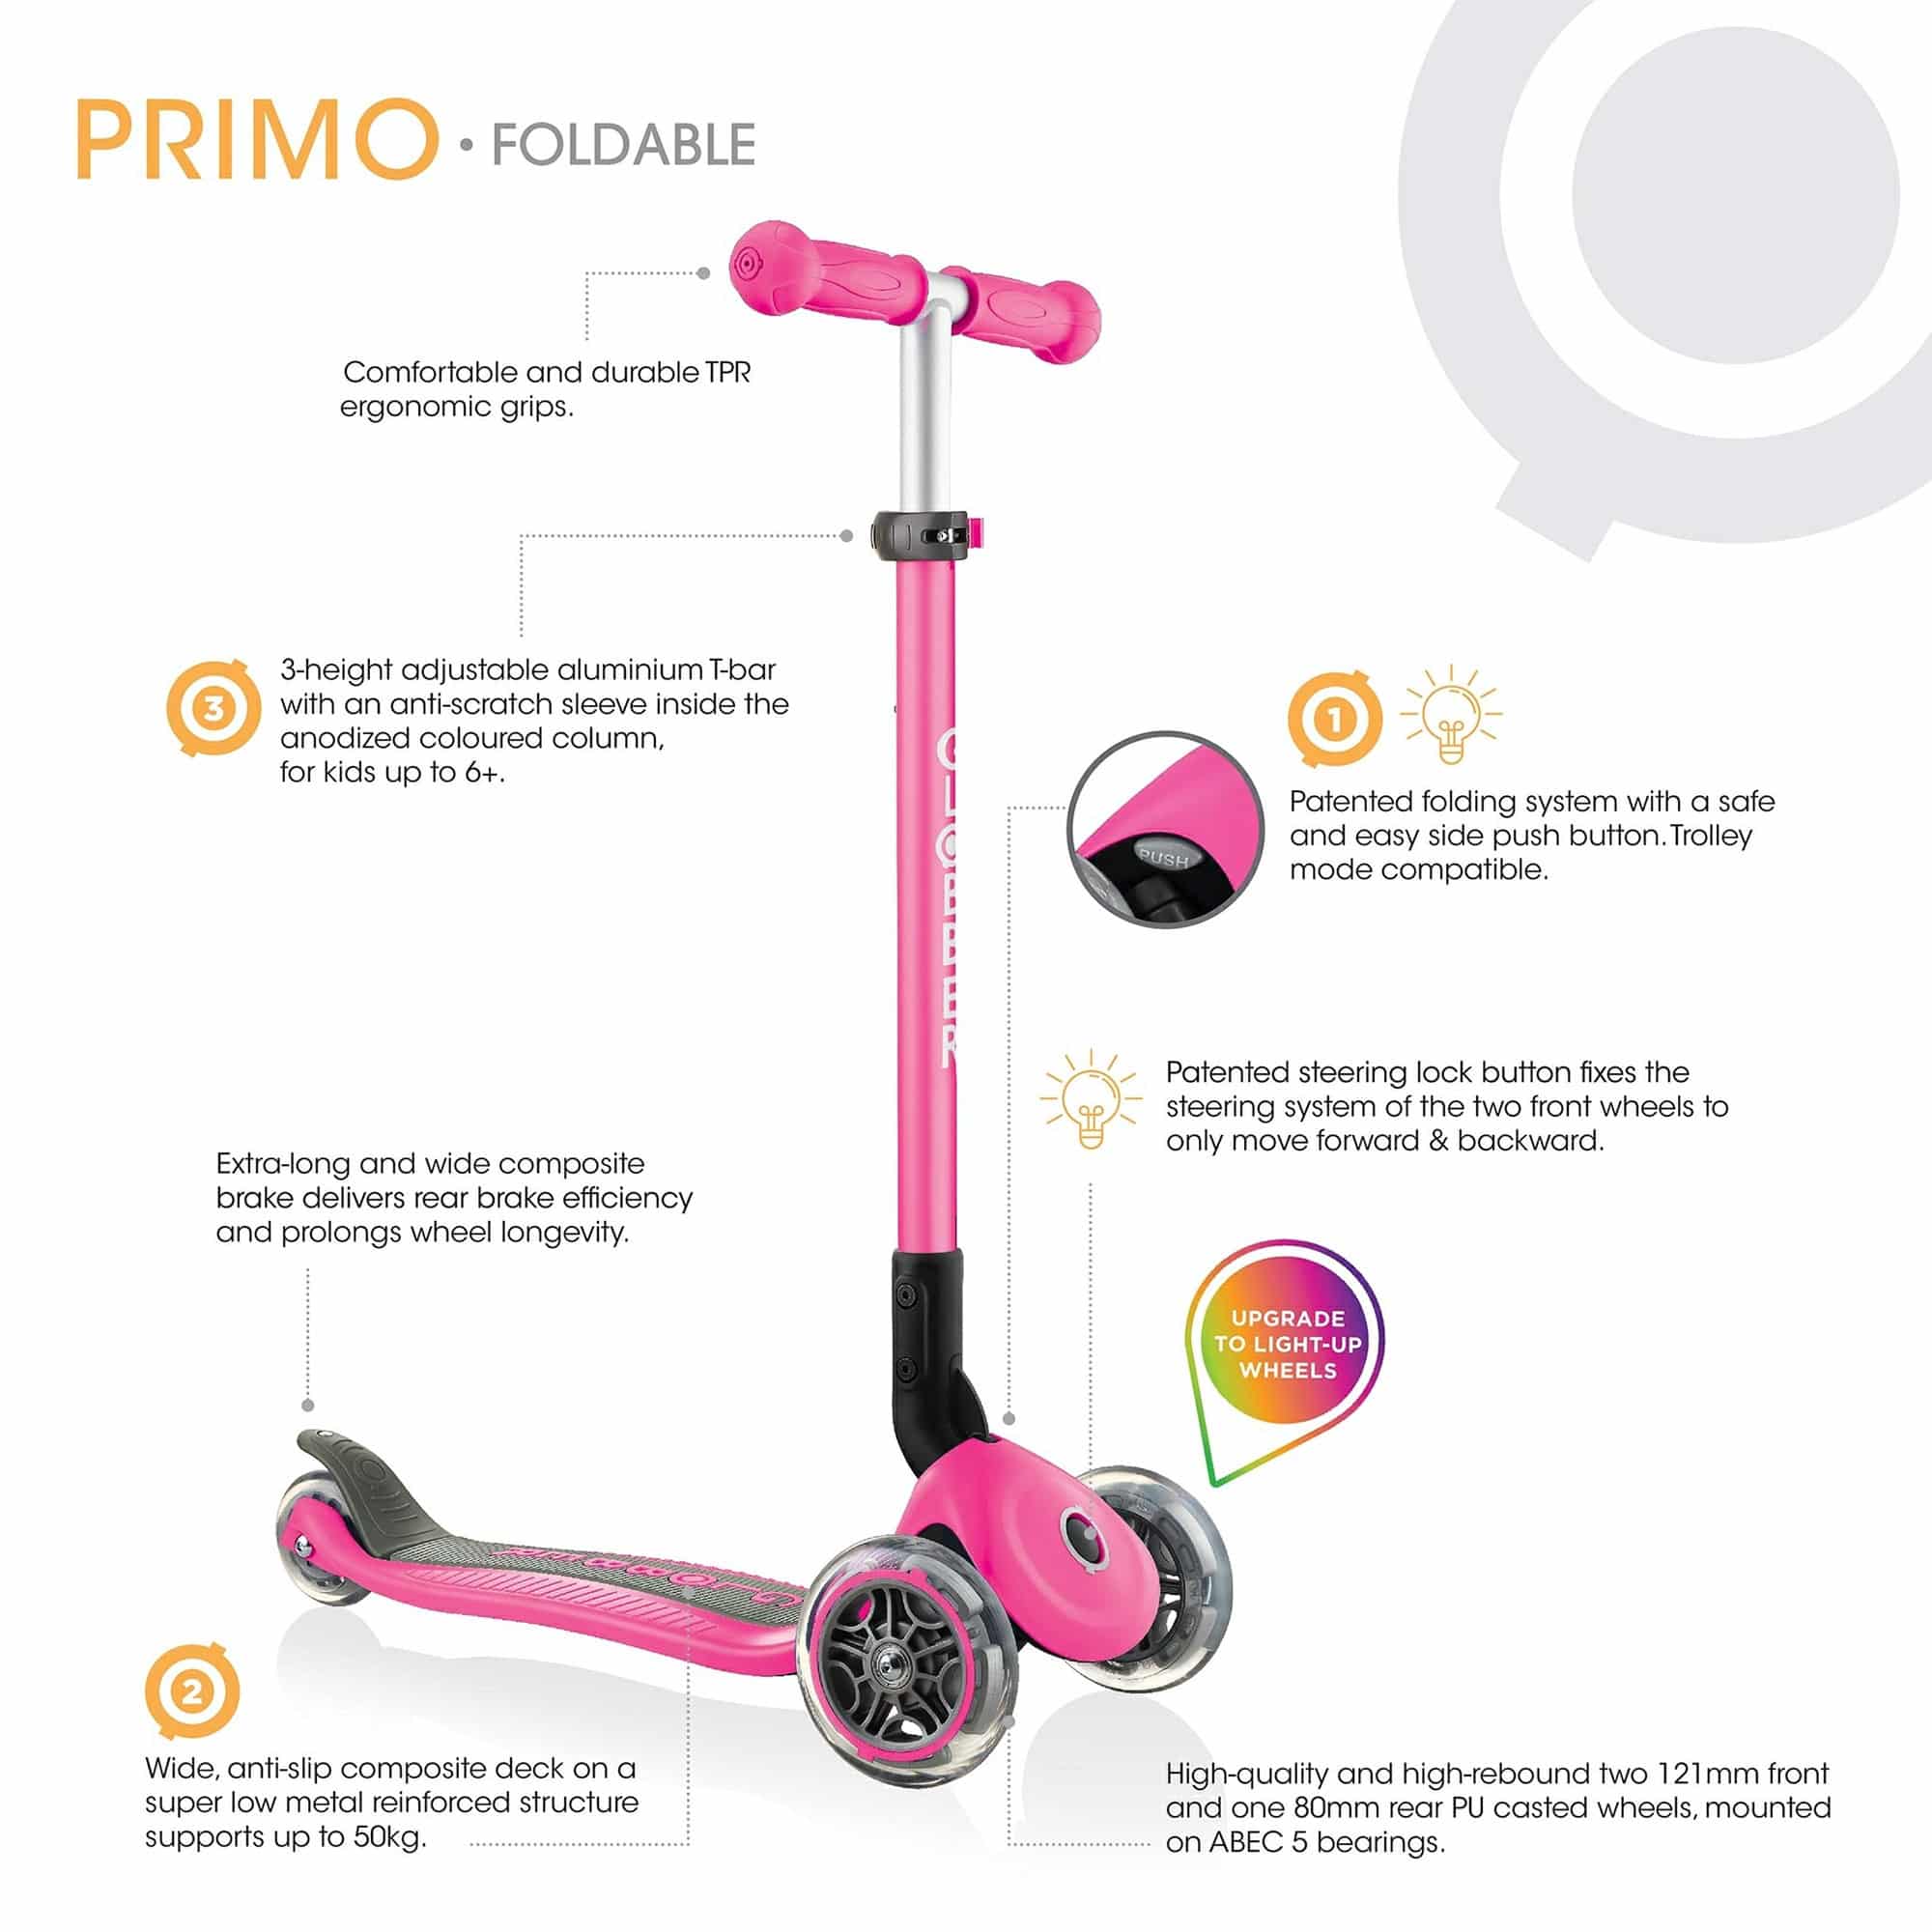 Globber - PRIMO Foldable Scooter